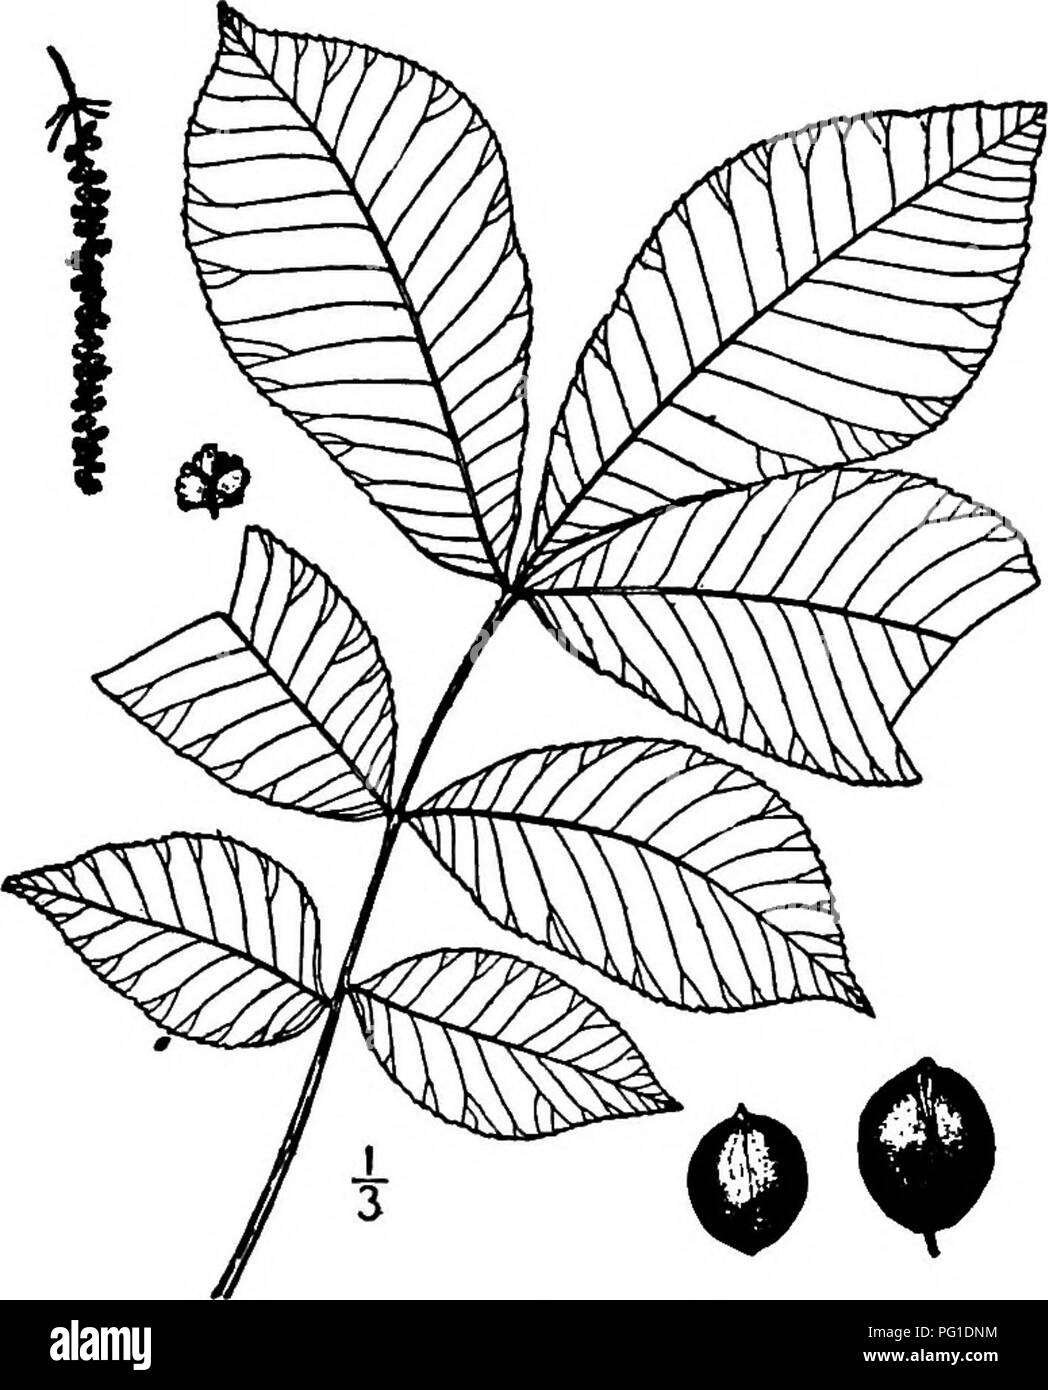 . North American trees : being descriptions and illustrations of the trees growing independently of cultivation in North America, north of Mexico and the West Indies . Trees. 224 The Hickories Bark shaggy, at least when old; fruit subglobose to oblong. Fruit little flattened; bract of staminate calyx short. Fruit much flattened; bract of staminate calyx long. Bark dose, not shaggy; fruit more or less obovoid. Foliage glabrous or little pubescent; bract of staminate calyx sometimes elongated; anther-sacs acute. Foliage pubescent or scurfy; bract of staminate calyx short, blunt; anther-sacs obtu Stock Photo